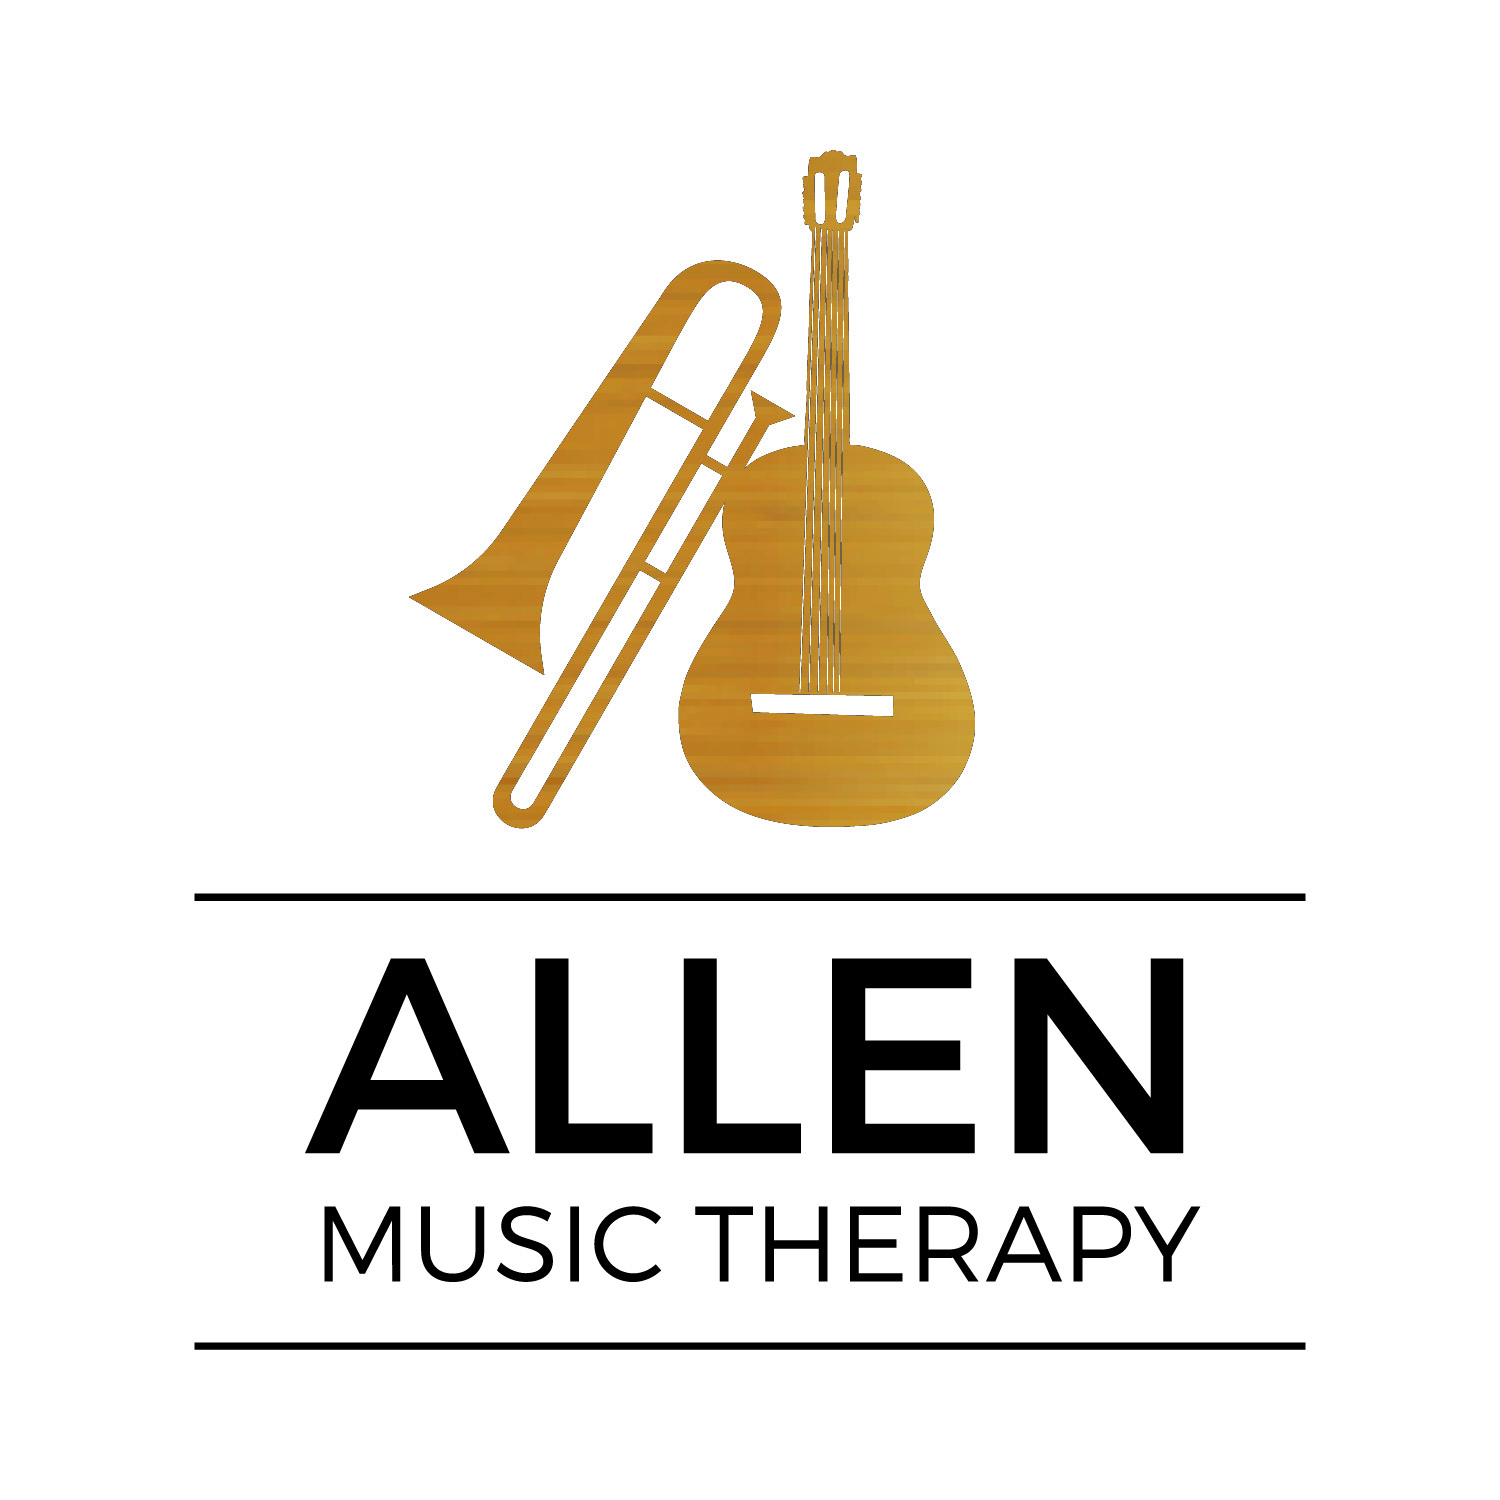 Allen Music Therapy